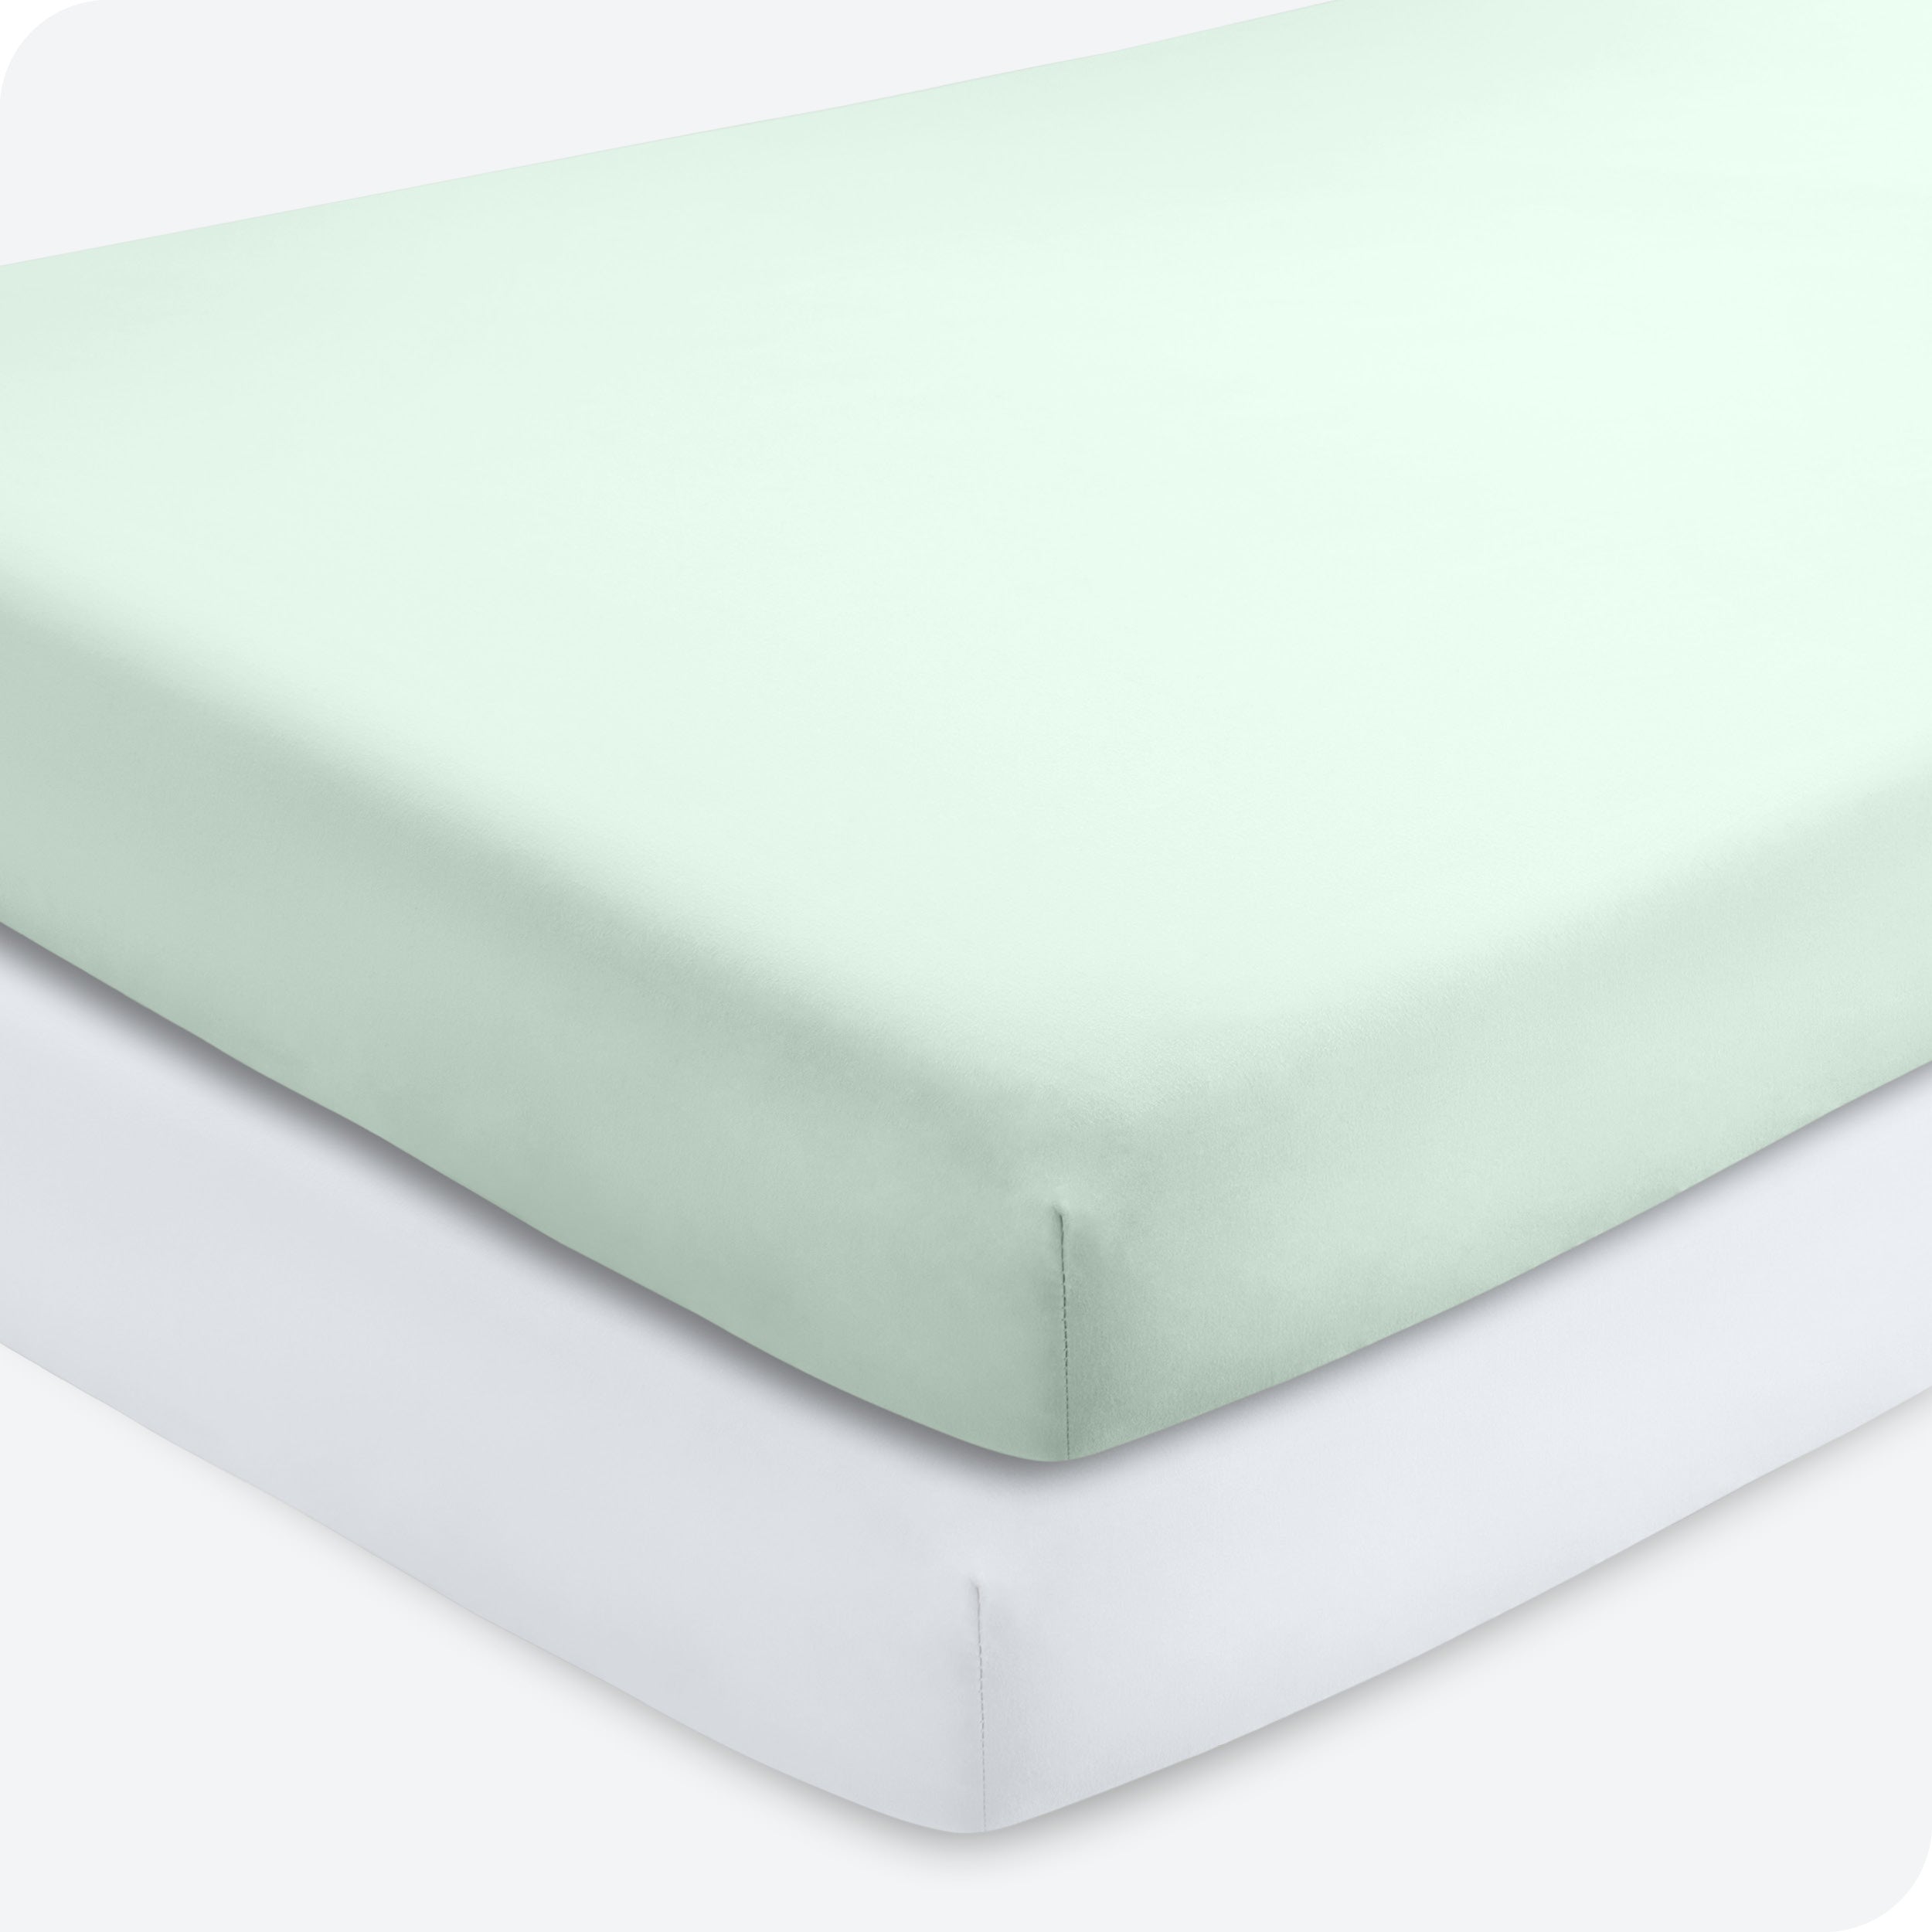 Two crib mattresses stacked with fitted sheets on them